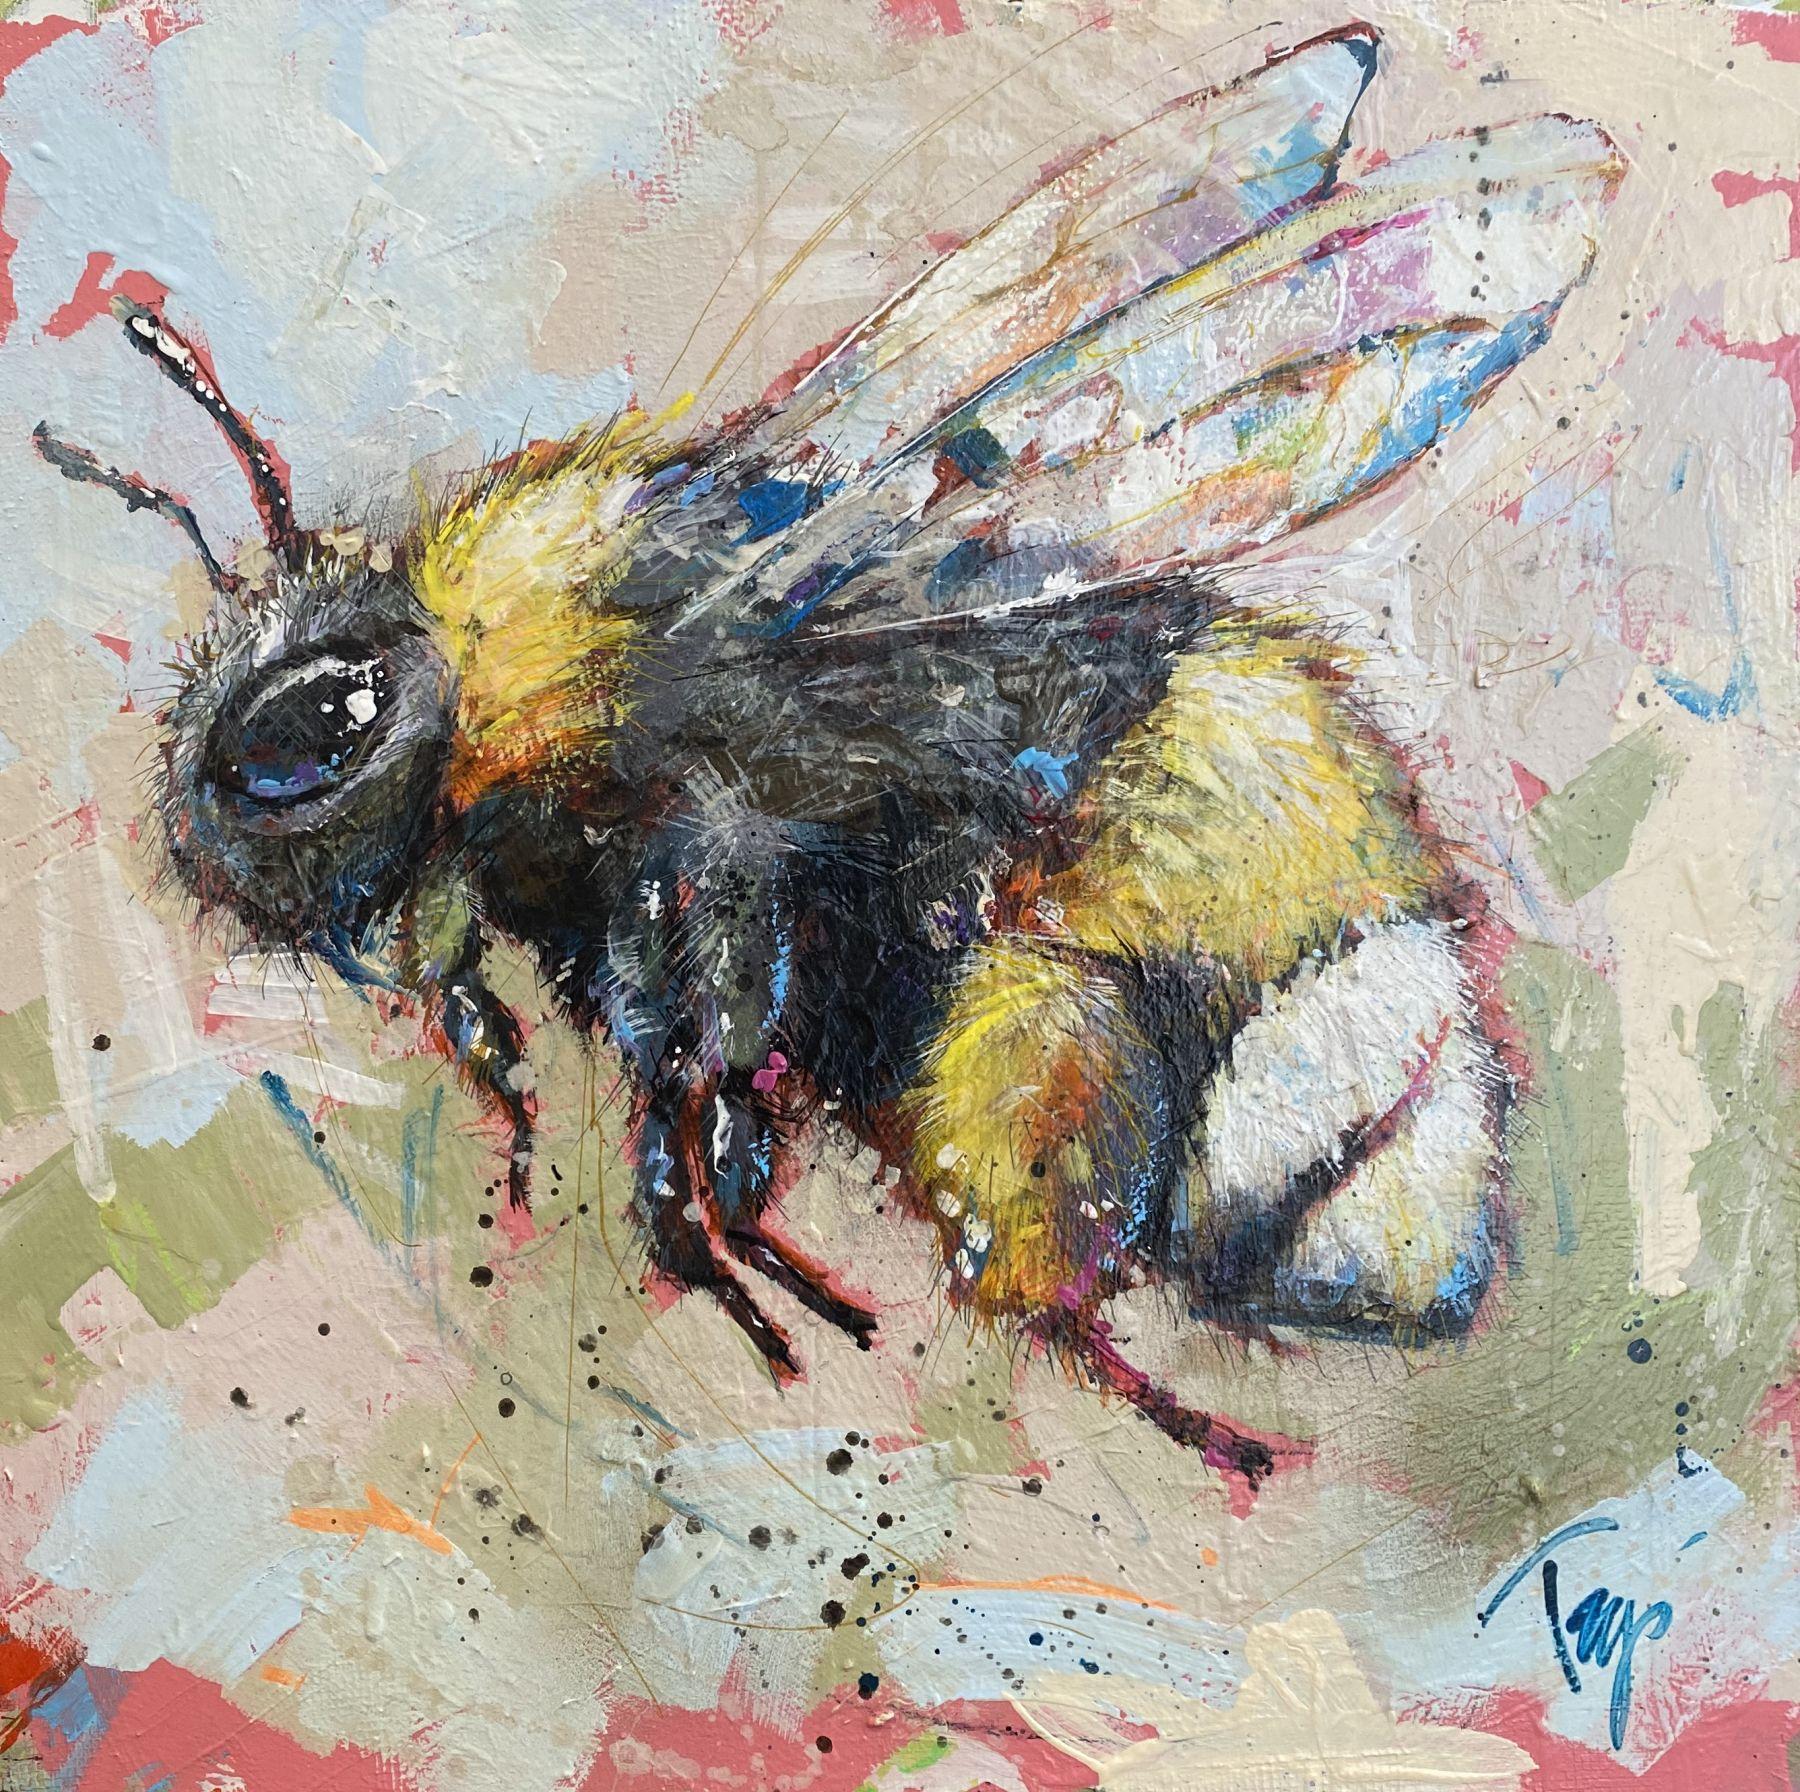 Trip Park, "Daisy Dancer", 24x24 Colorful Bumblebee Oil Painting on Canvas, 2021